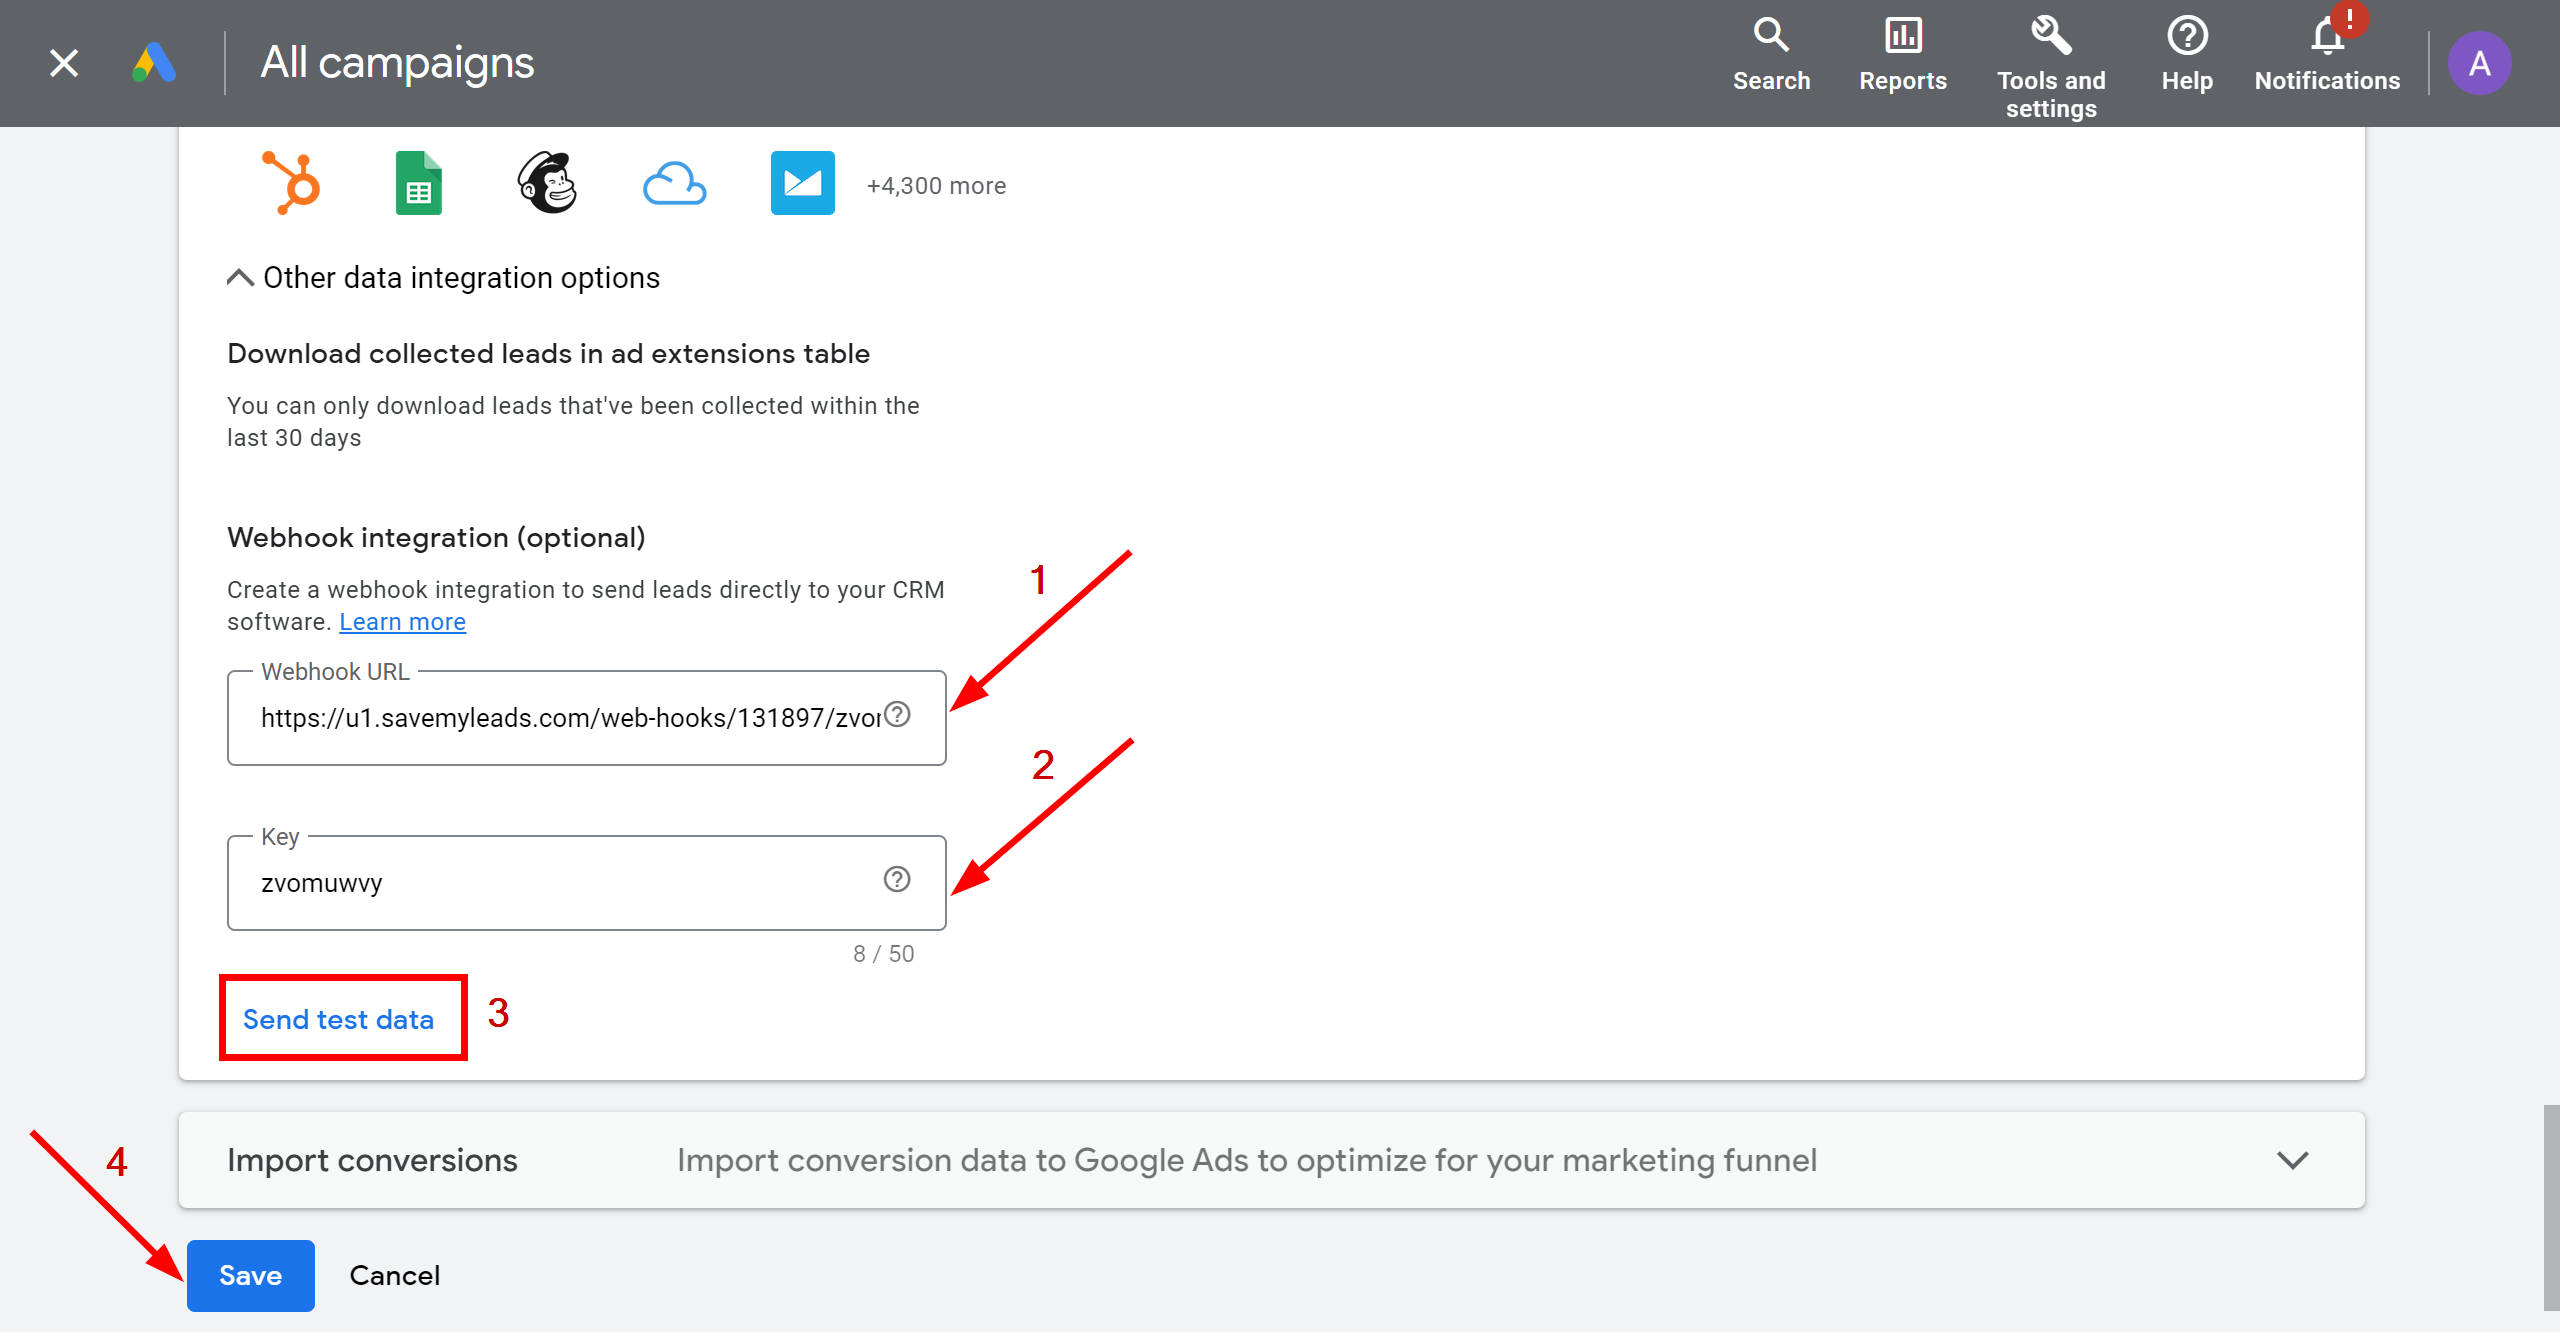 How to Connect Google Lead Form with Microsoft Dynamics 365 Create Opportunity | Data Source account connection